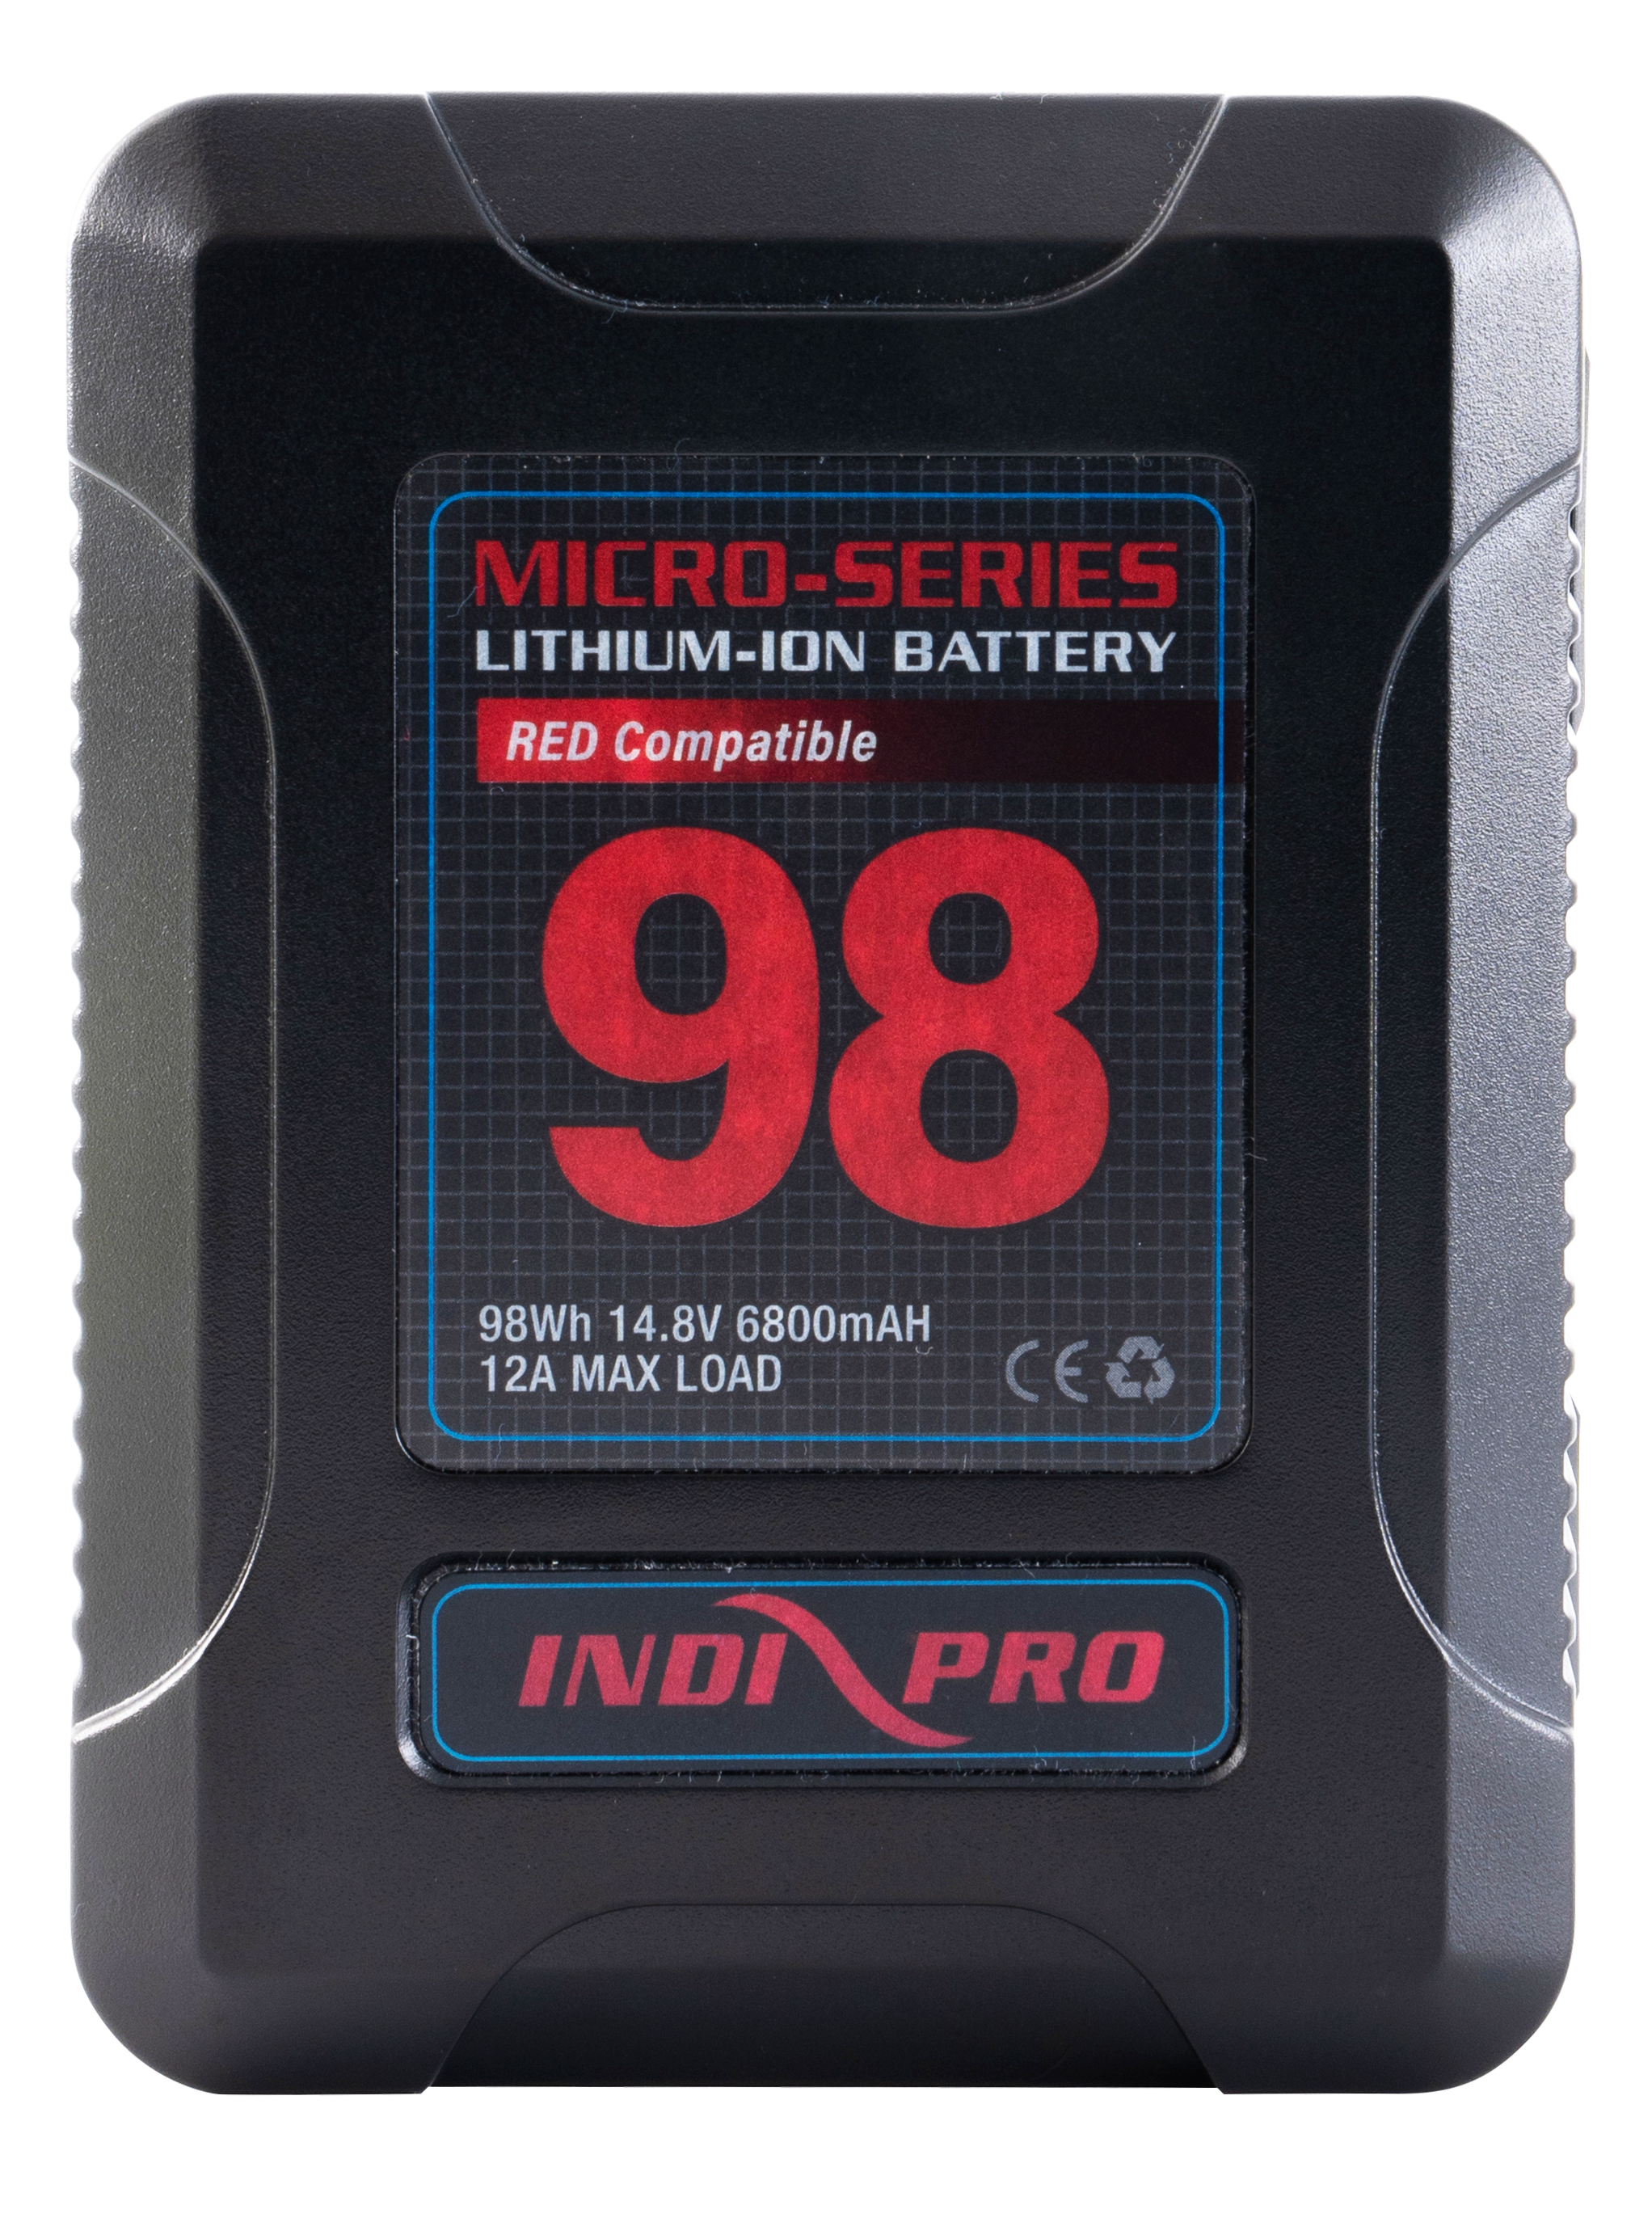 Micro-Series 98Wh V-Mount Li-Ion Battery (RED Compatible) Digital Cinema Indipro 